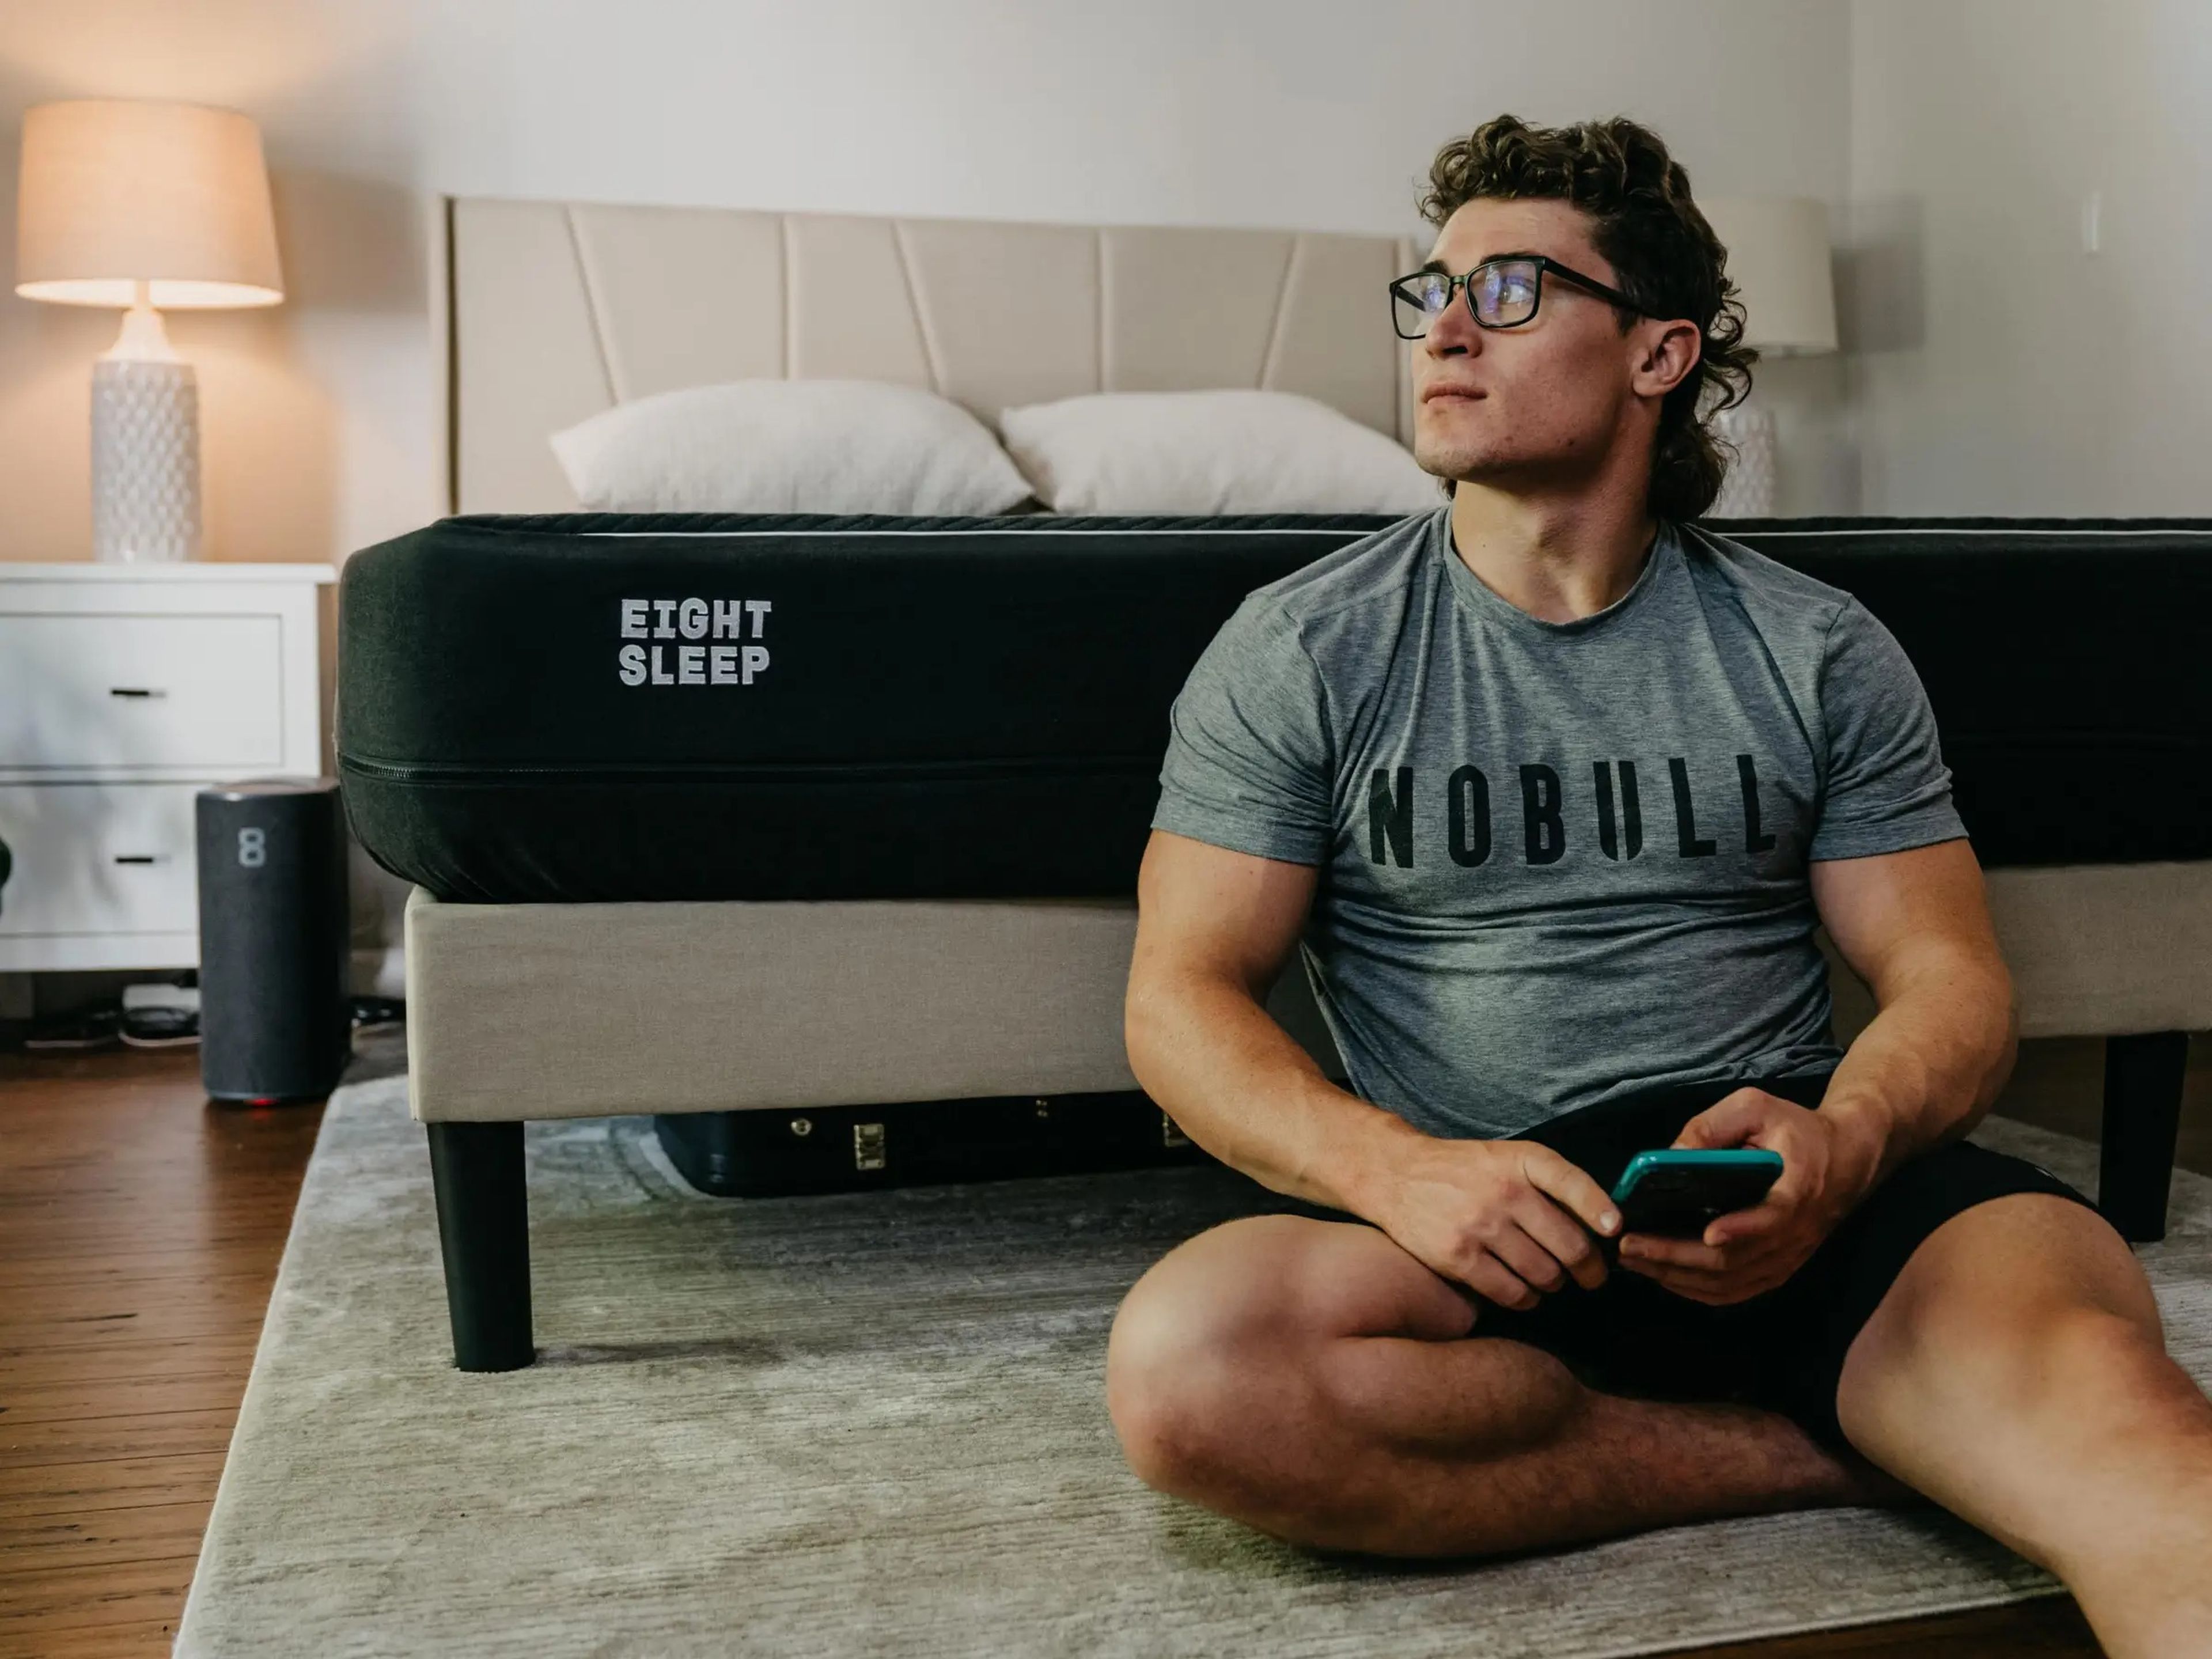 CrossFit Games athlete Justin Medeiros sitting on the floor with his back to an EightSleep brand mattress on a comfy bed